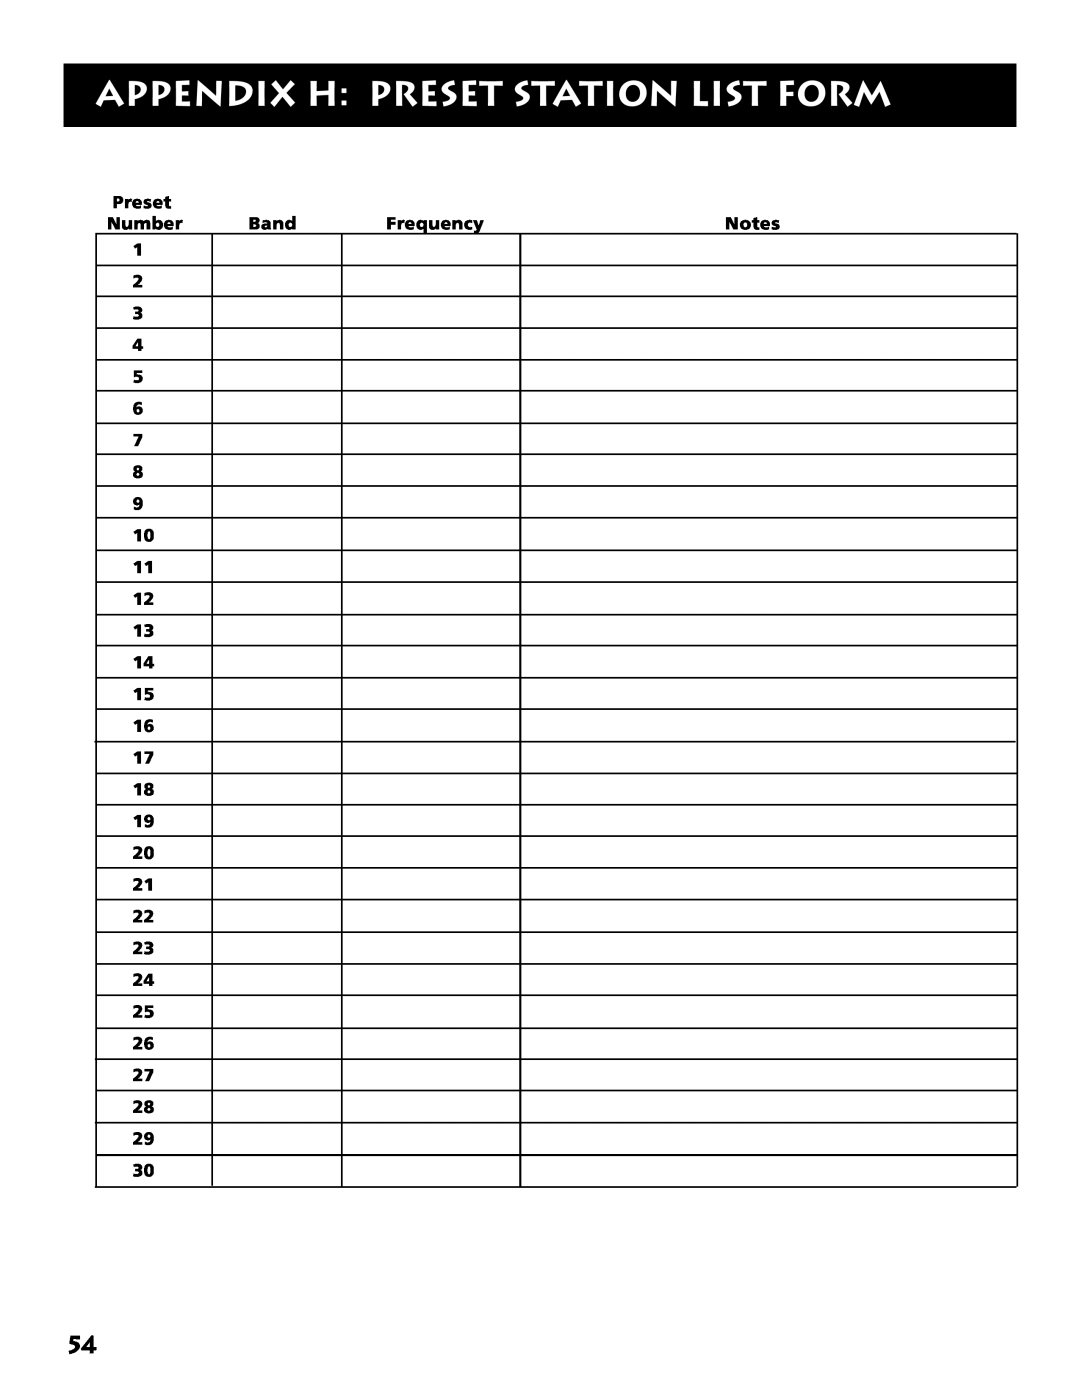 Electrohome RV-3798 manual Appendix H: Preset Station List Form, Number, Band, Frequency, Notes 